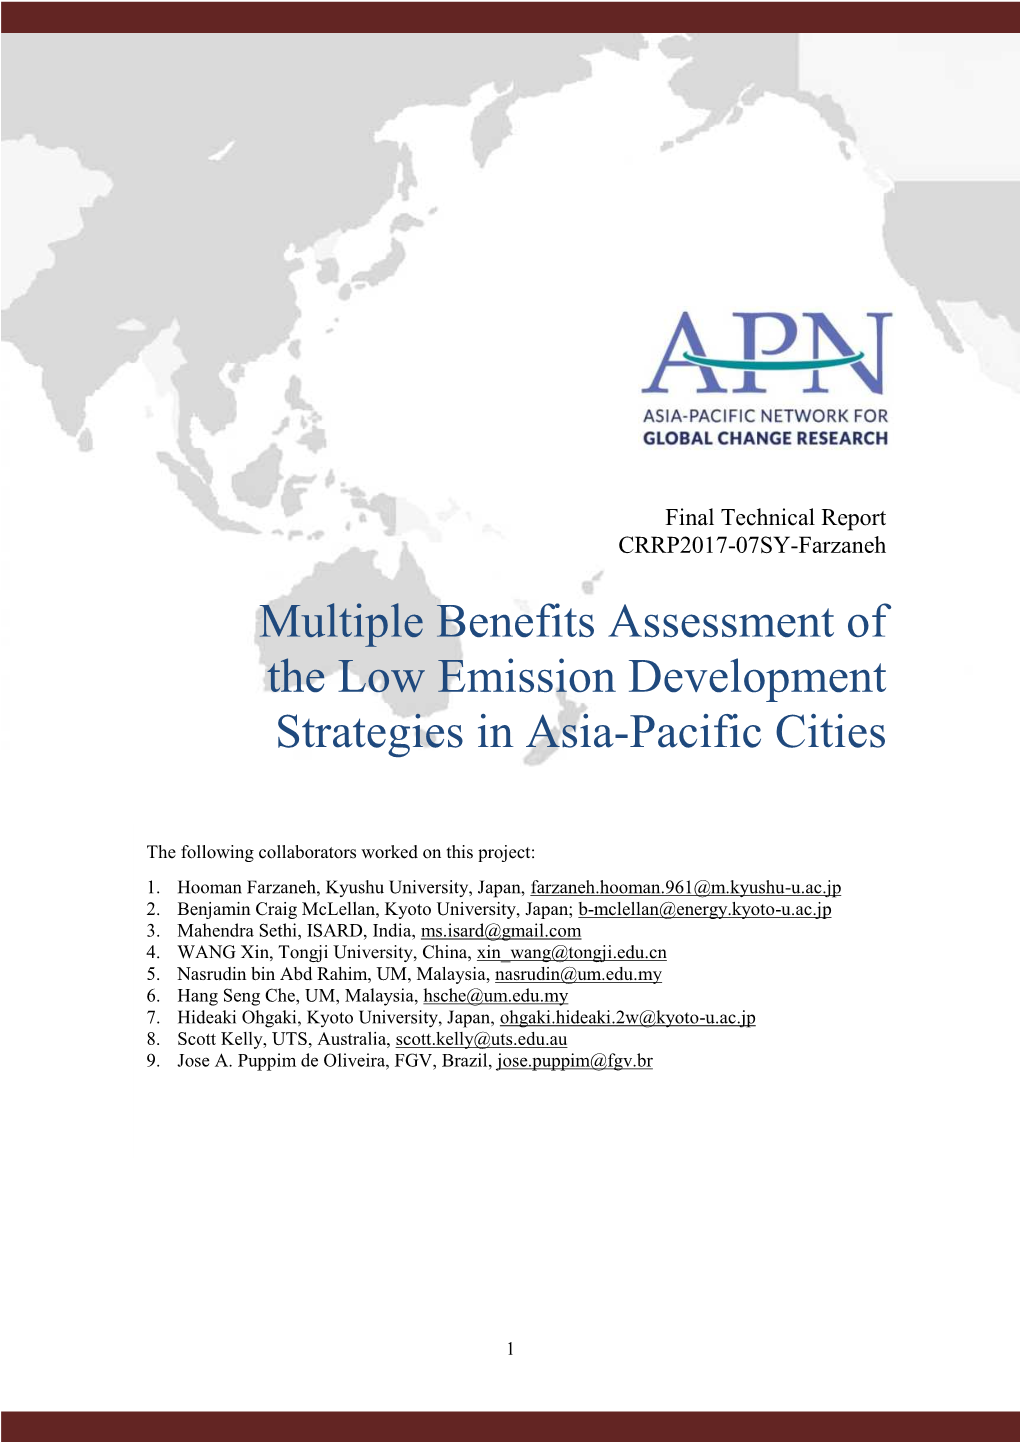 Multiple Benefits Assessment of the Low Emission Development Strategies in Asia-Pacific Cities